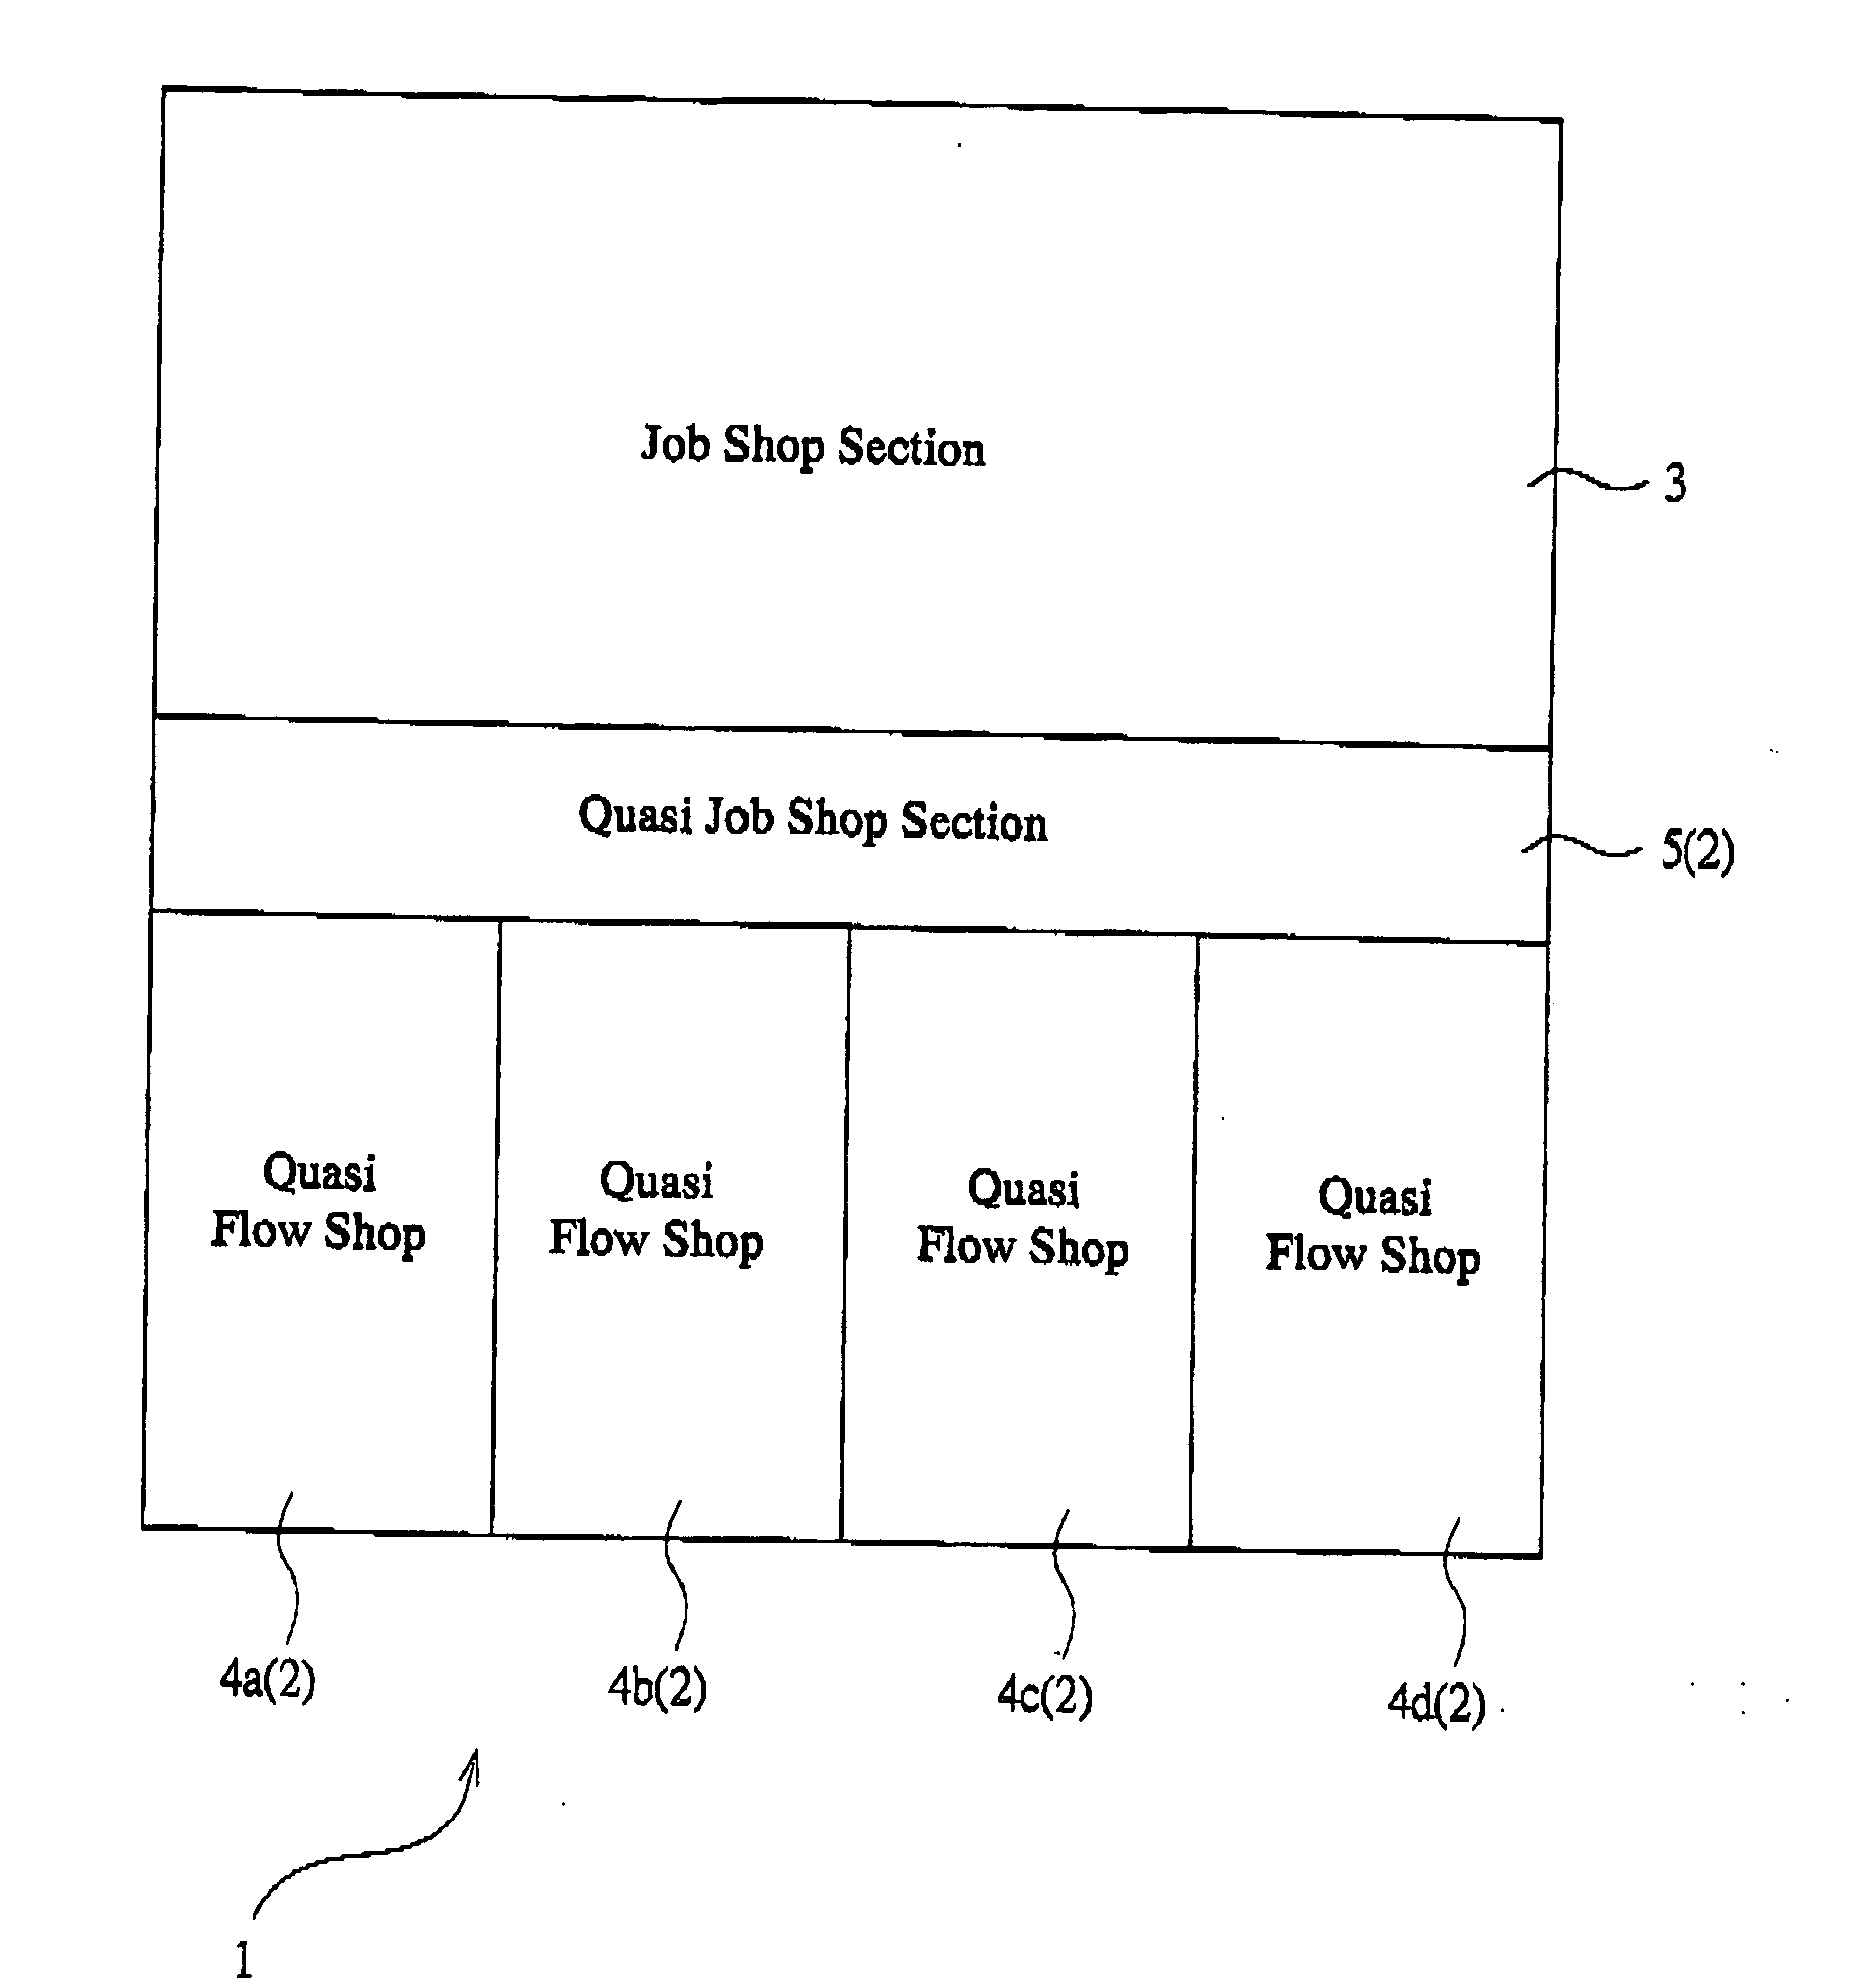 Semiconductor manufacturing system, work manufacturing system, and conveyance system